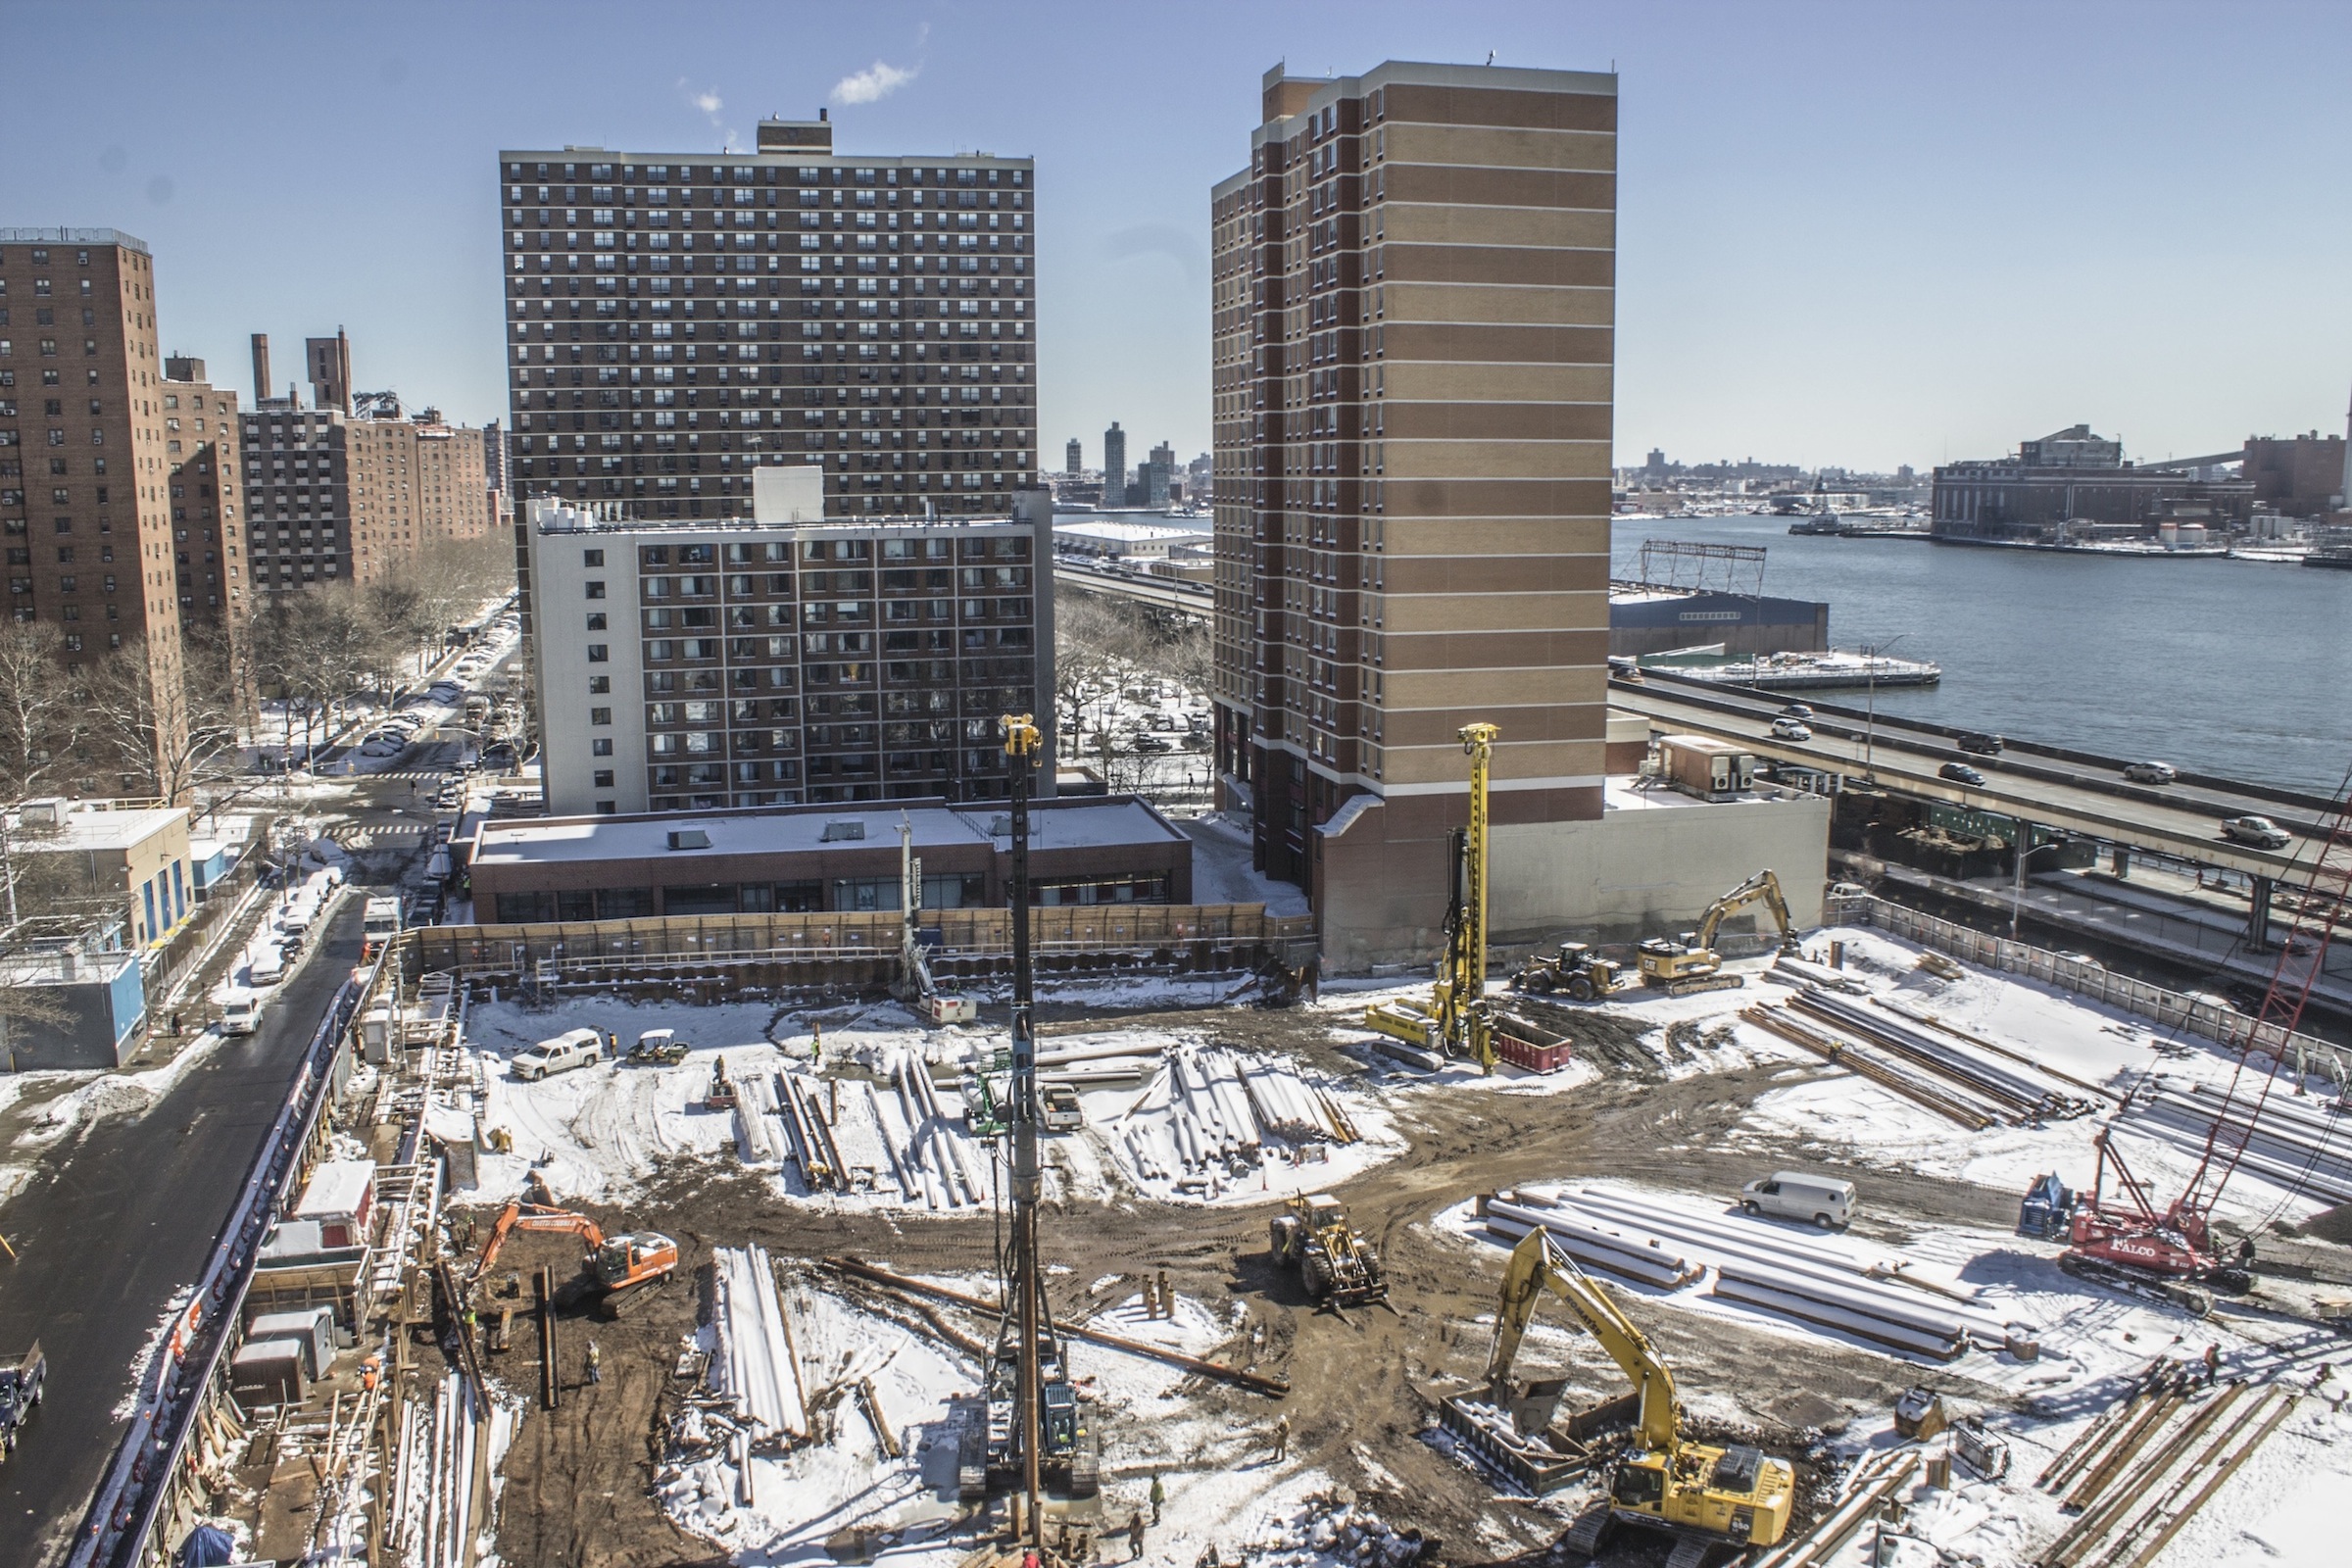 The 250 South St. construction site, viewed from the Manhattan Bridge.  Photo by Zach Williams